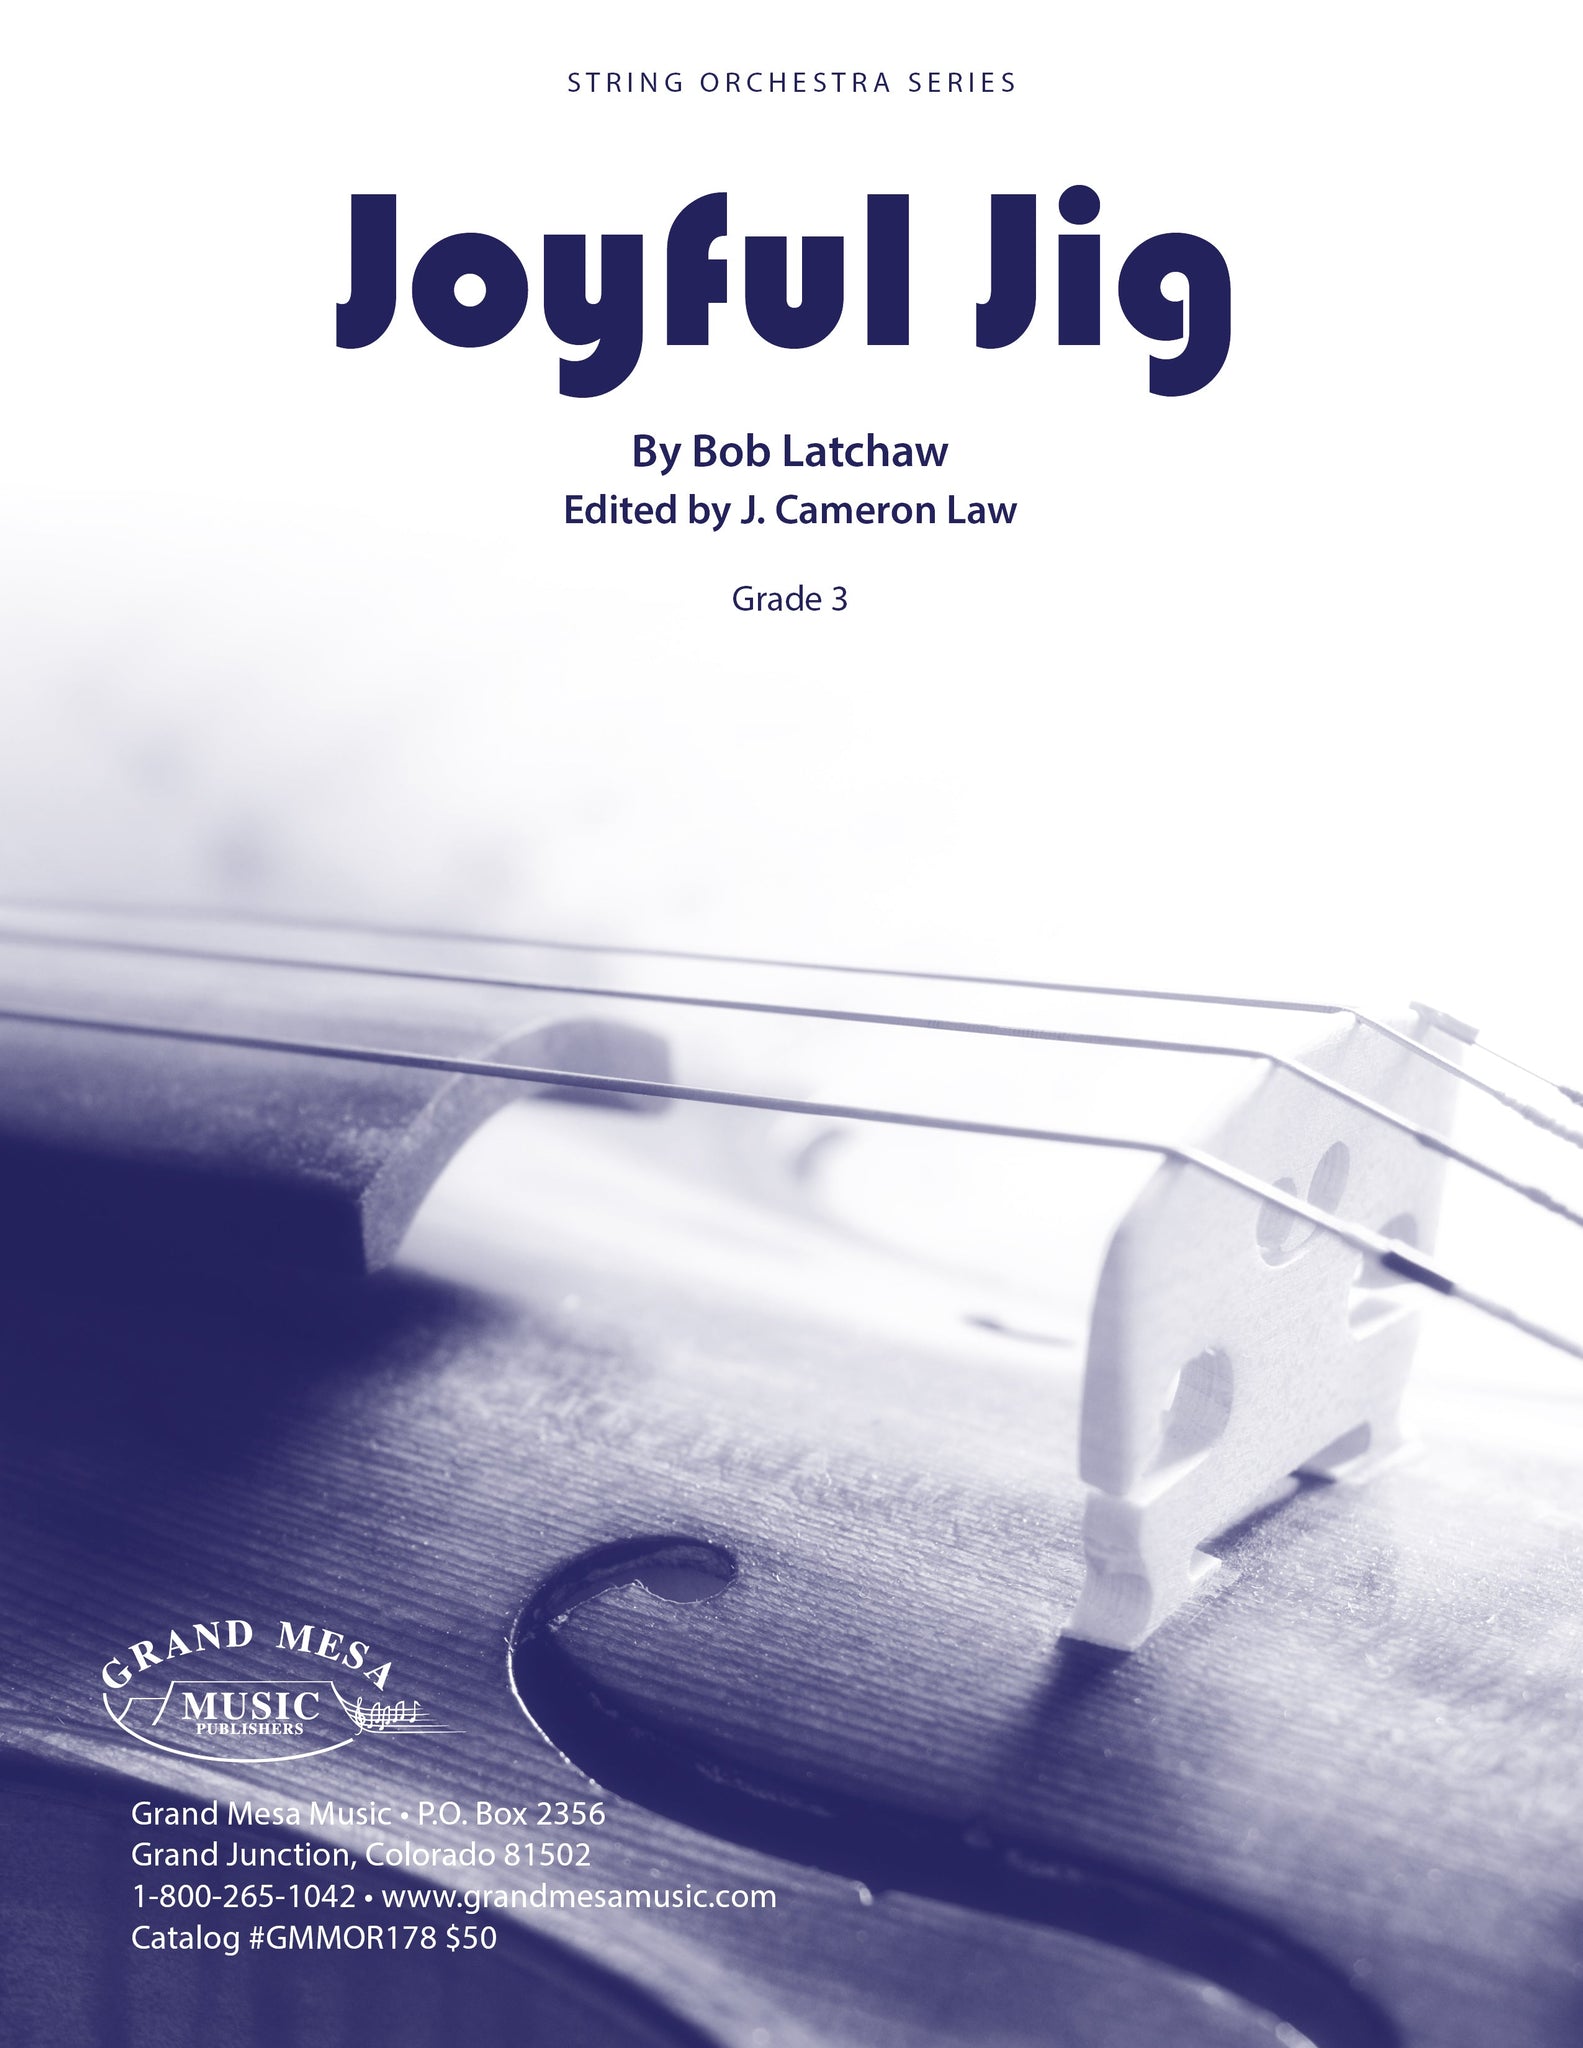 Strings sheet music cover of Joyful Jig, composed by Bob Latchaw.